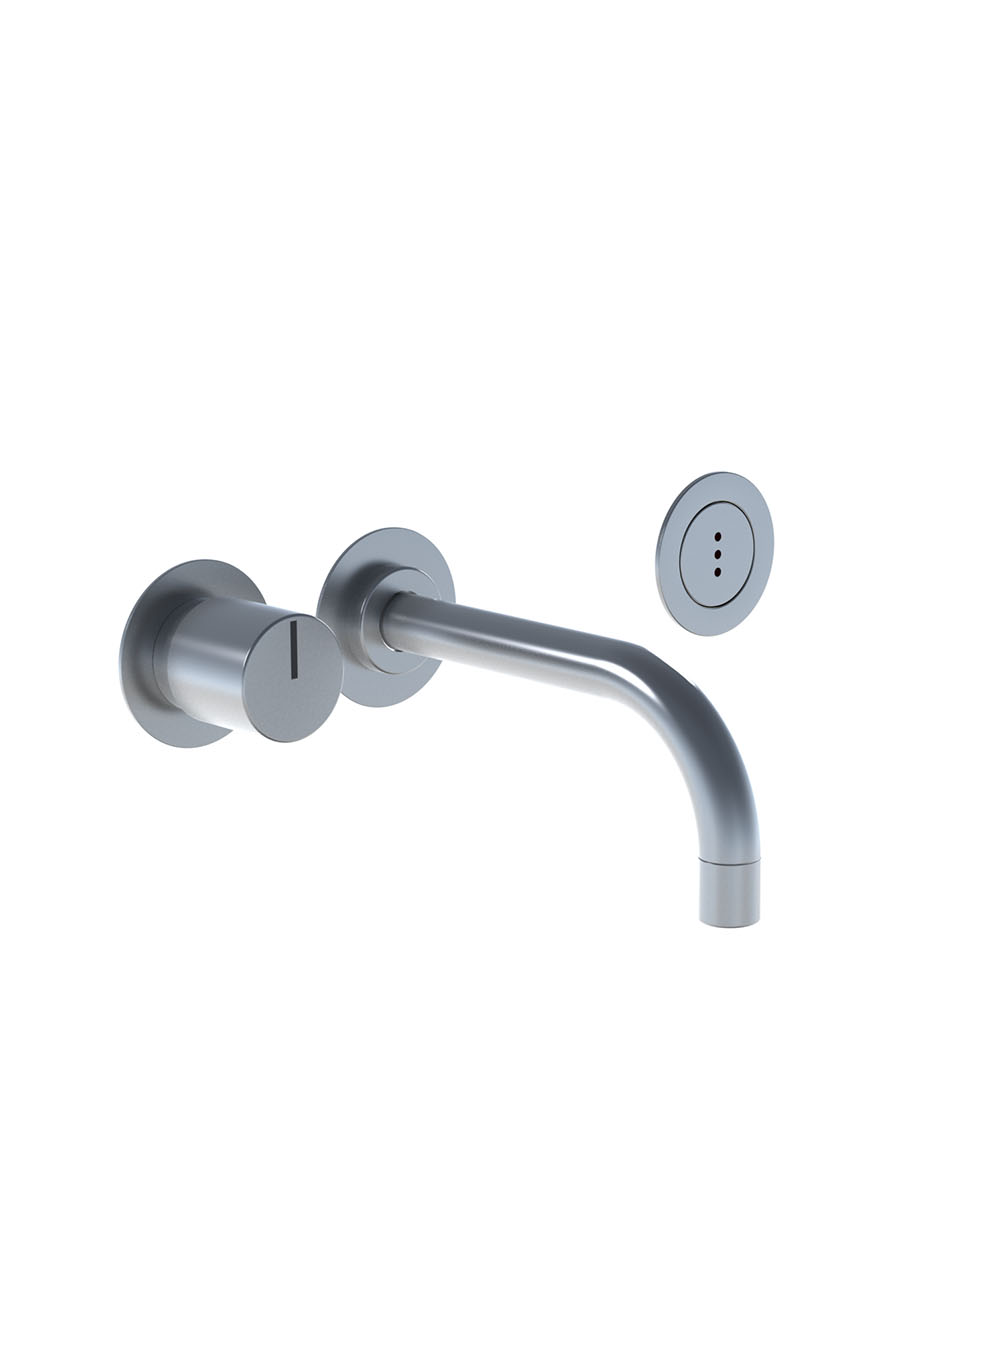 4911: Build-in basin mixer with on-off sensor for ‘hands free’ operation. Sensor aligned with wall. Val...